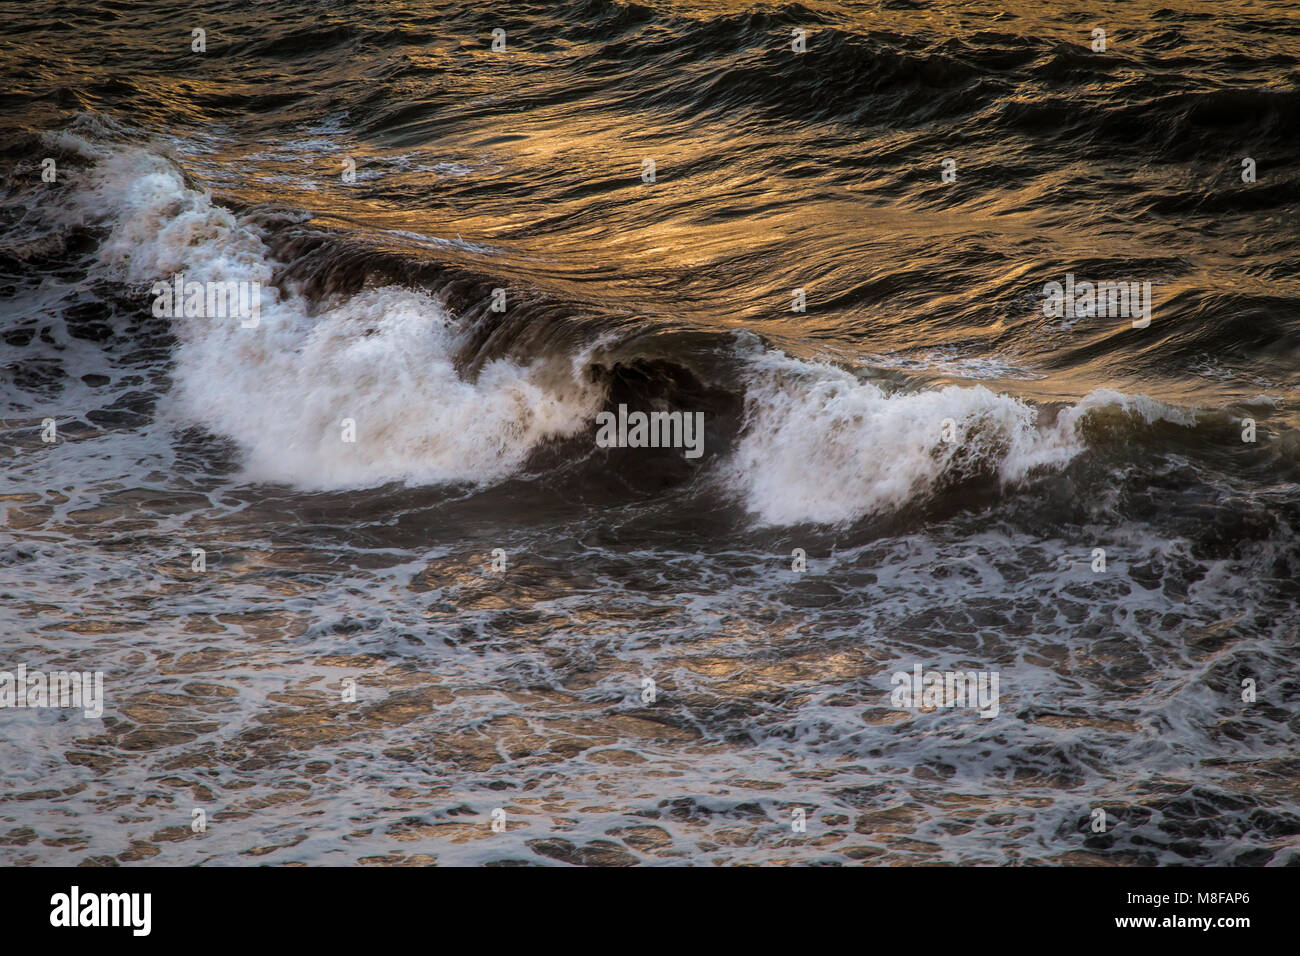 An aerial view of surf waves at a pebble beach in the evening sun Stock Photo